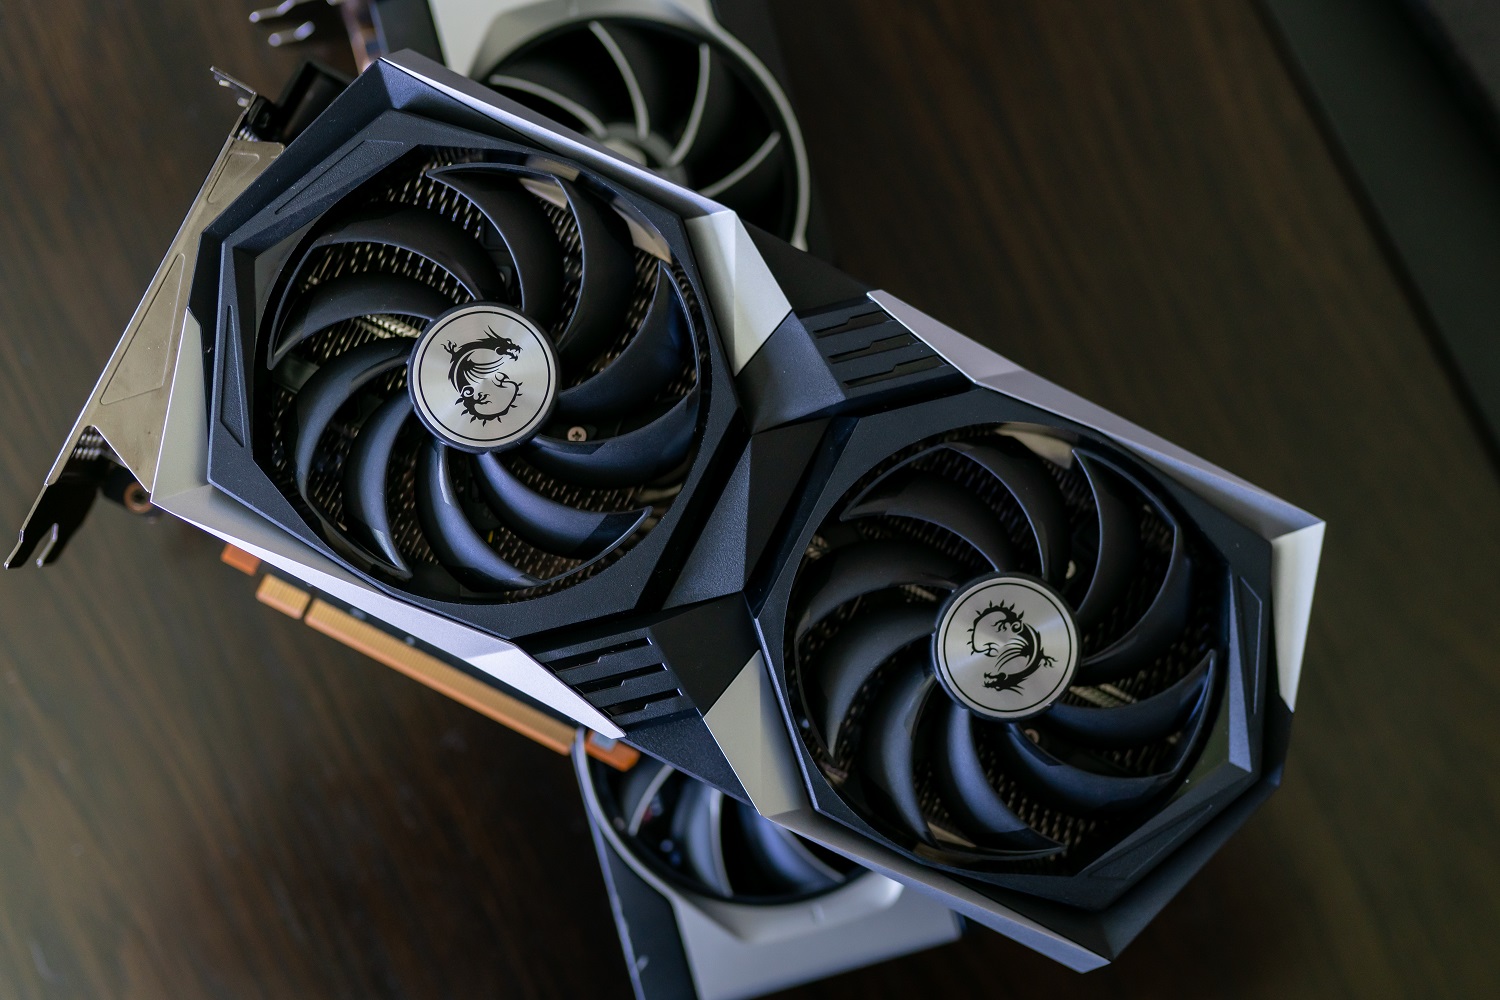 AMD Radeon RX 6600 XT Graphics Cards Announced for 1080p Gaming